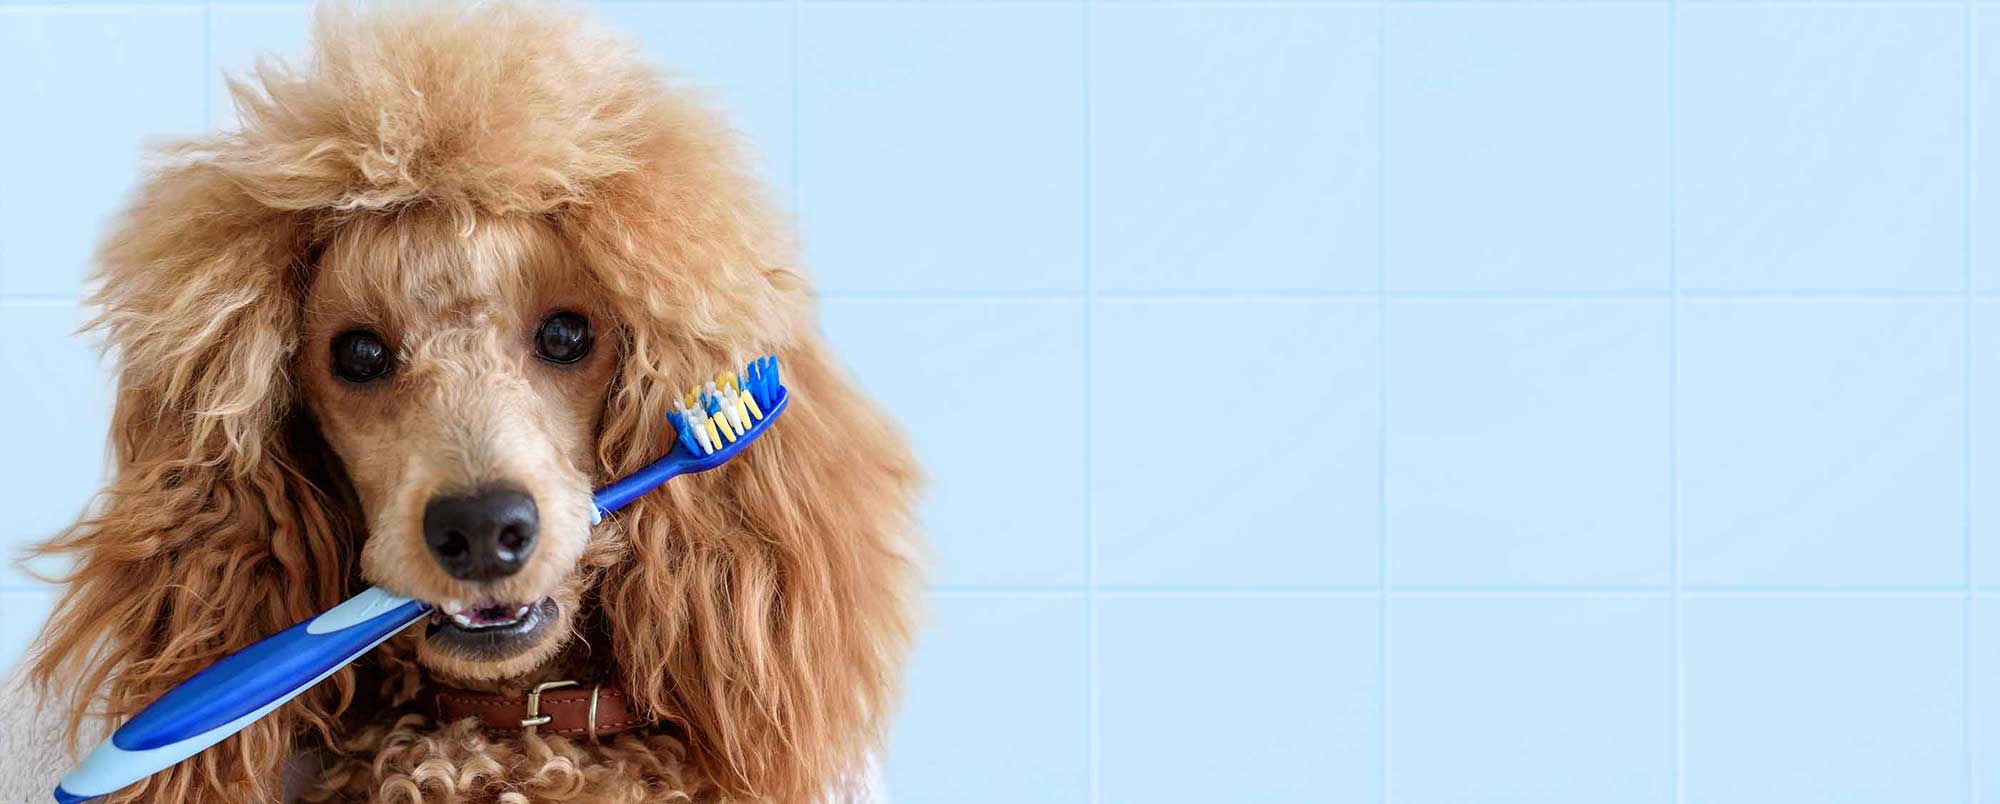 French Poodle with Tooth Brush